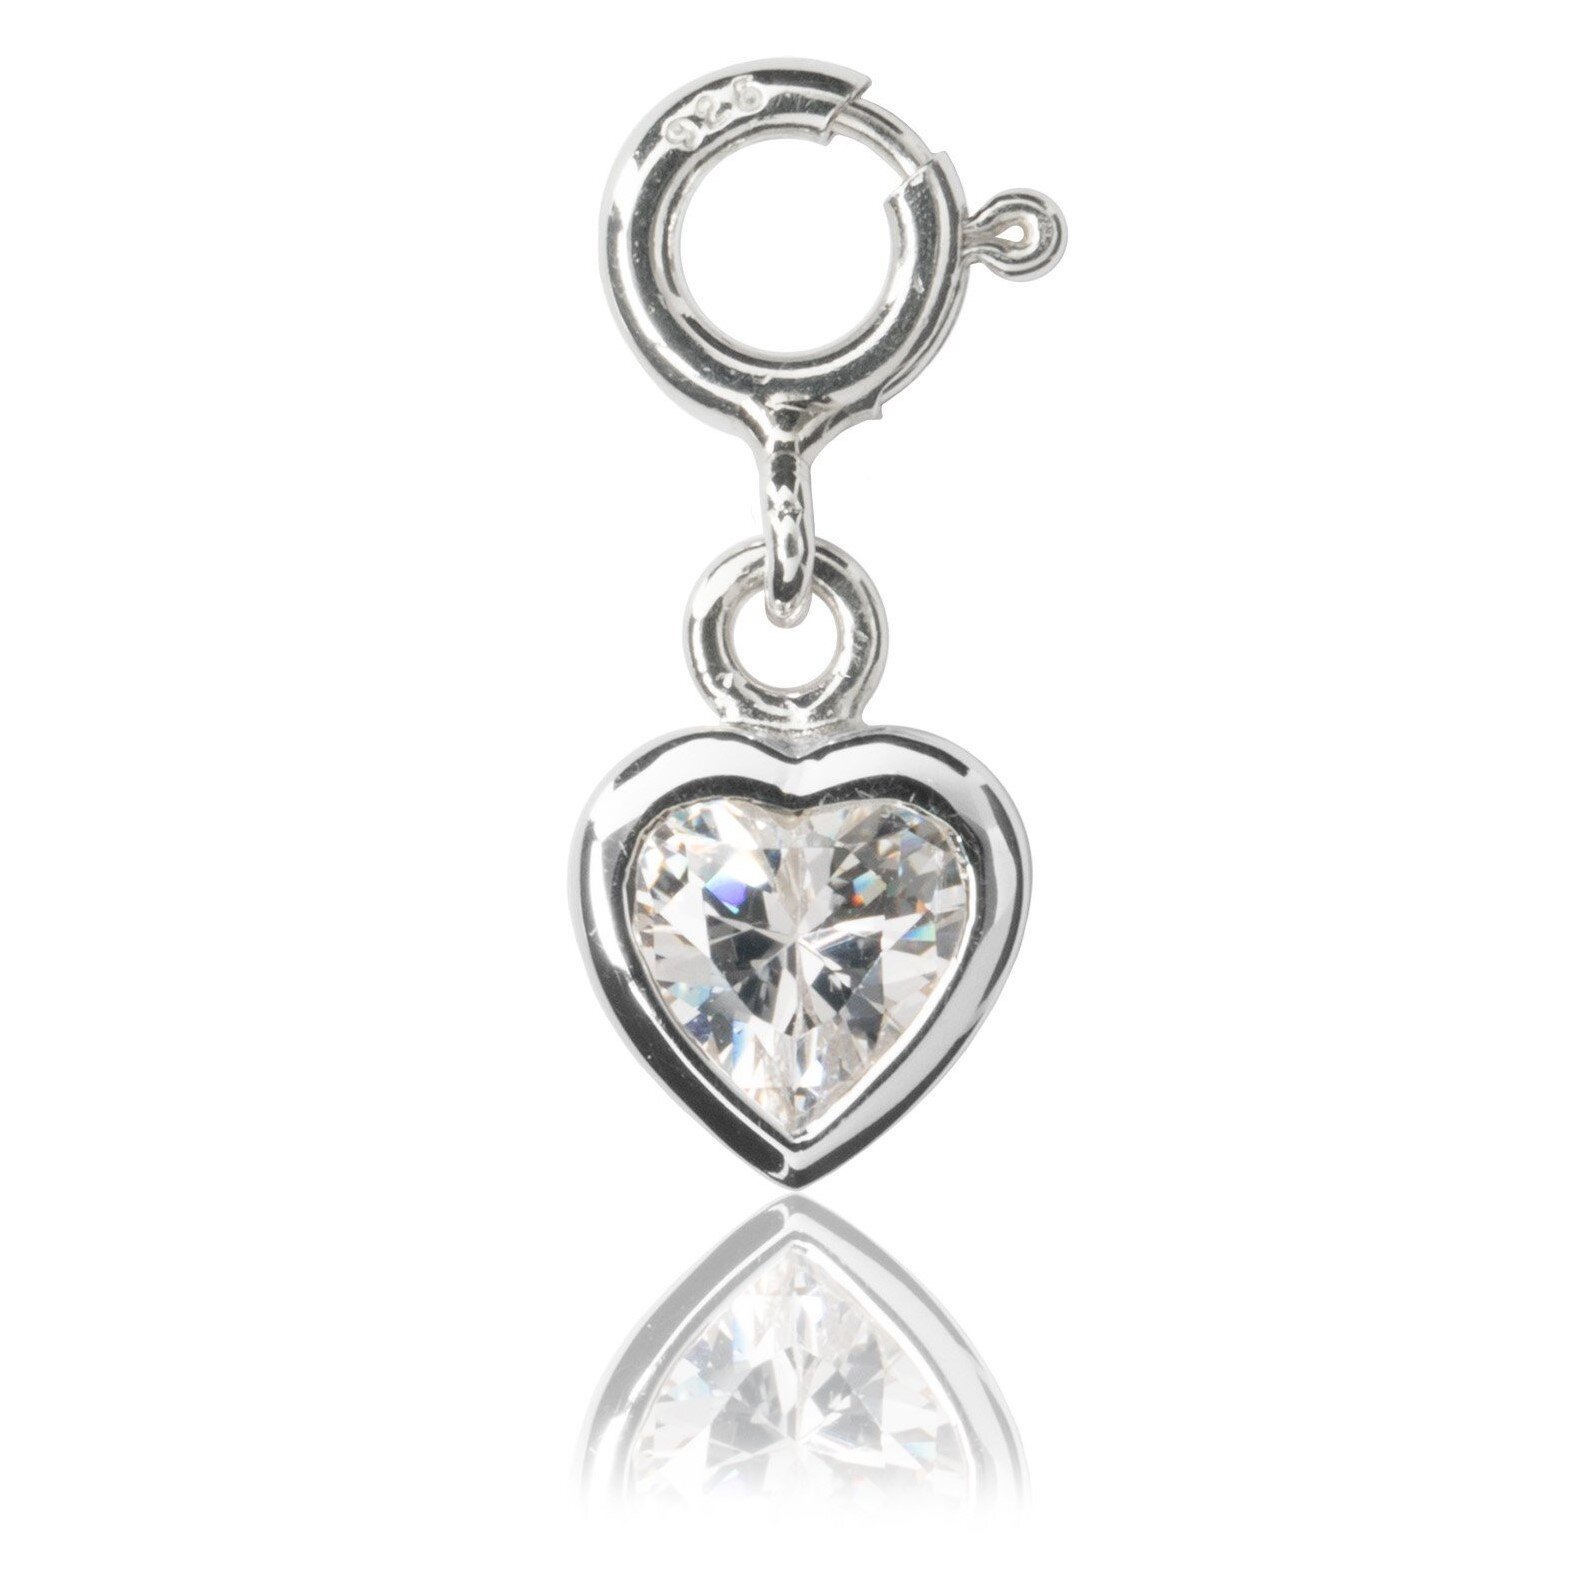 Sparkle Heart Charm - Silver - CLOTHING-ACCESSORIES-JEWELLERY : Kids ...